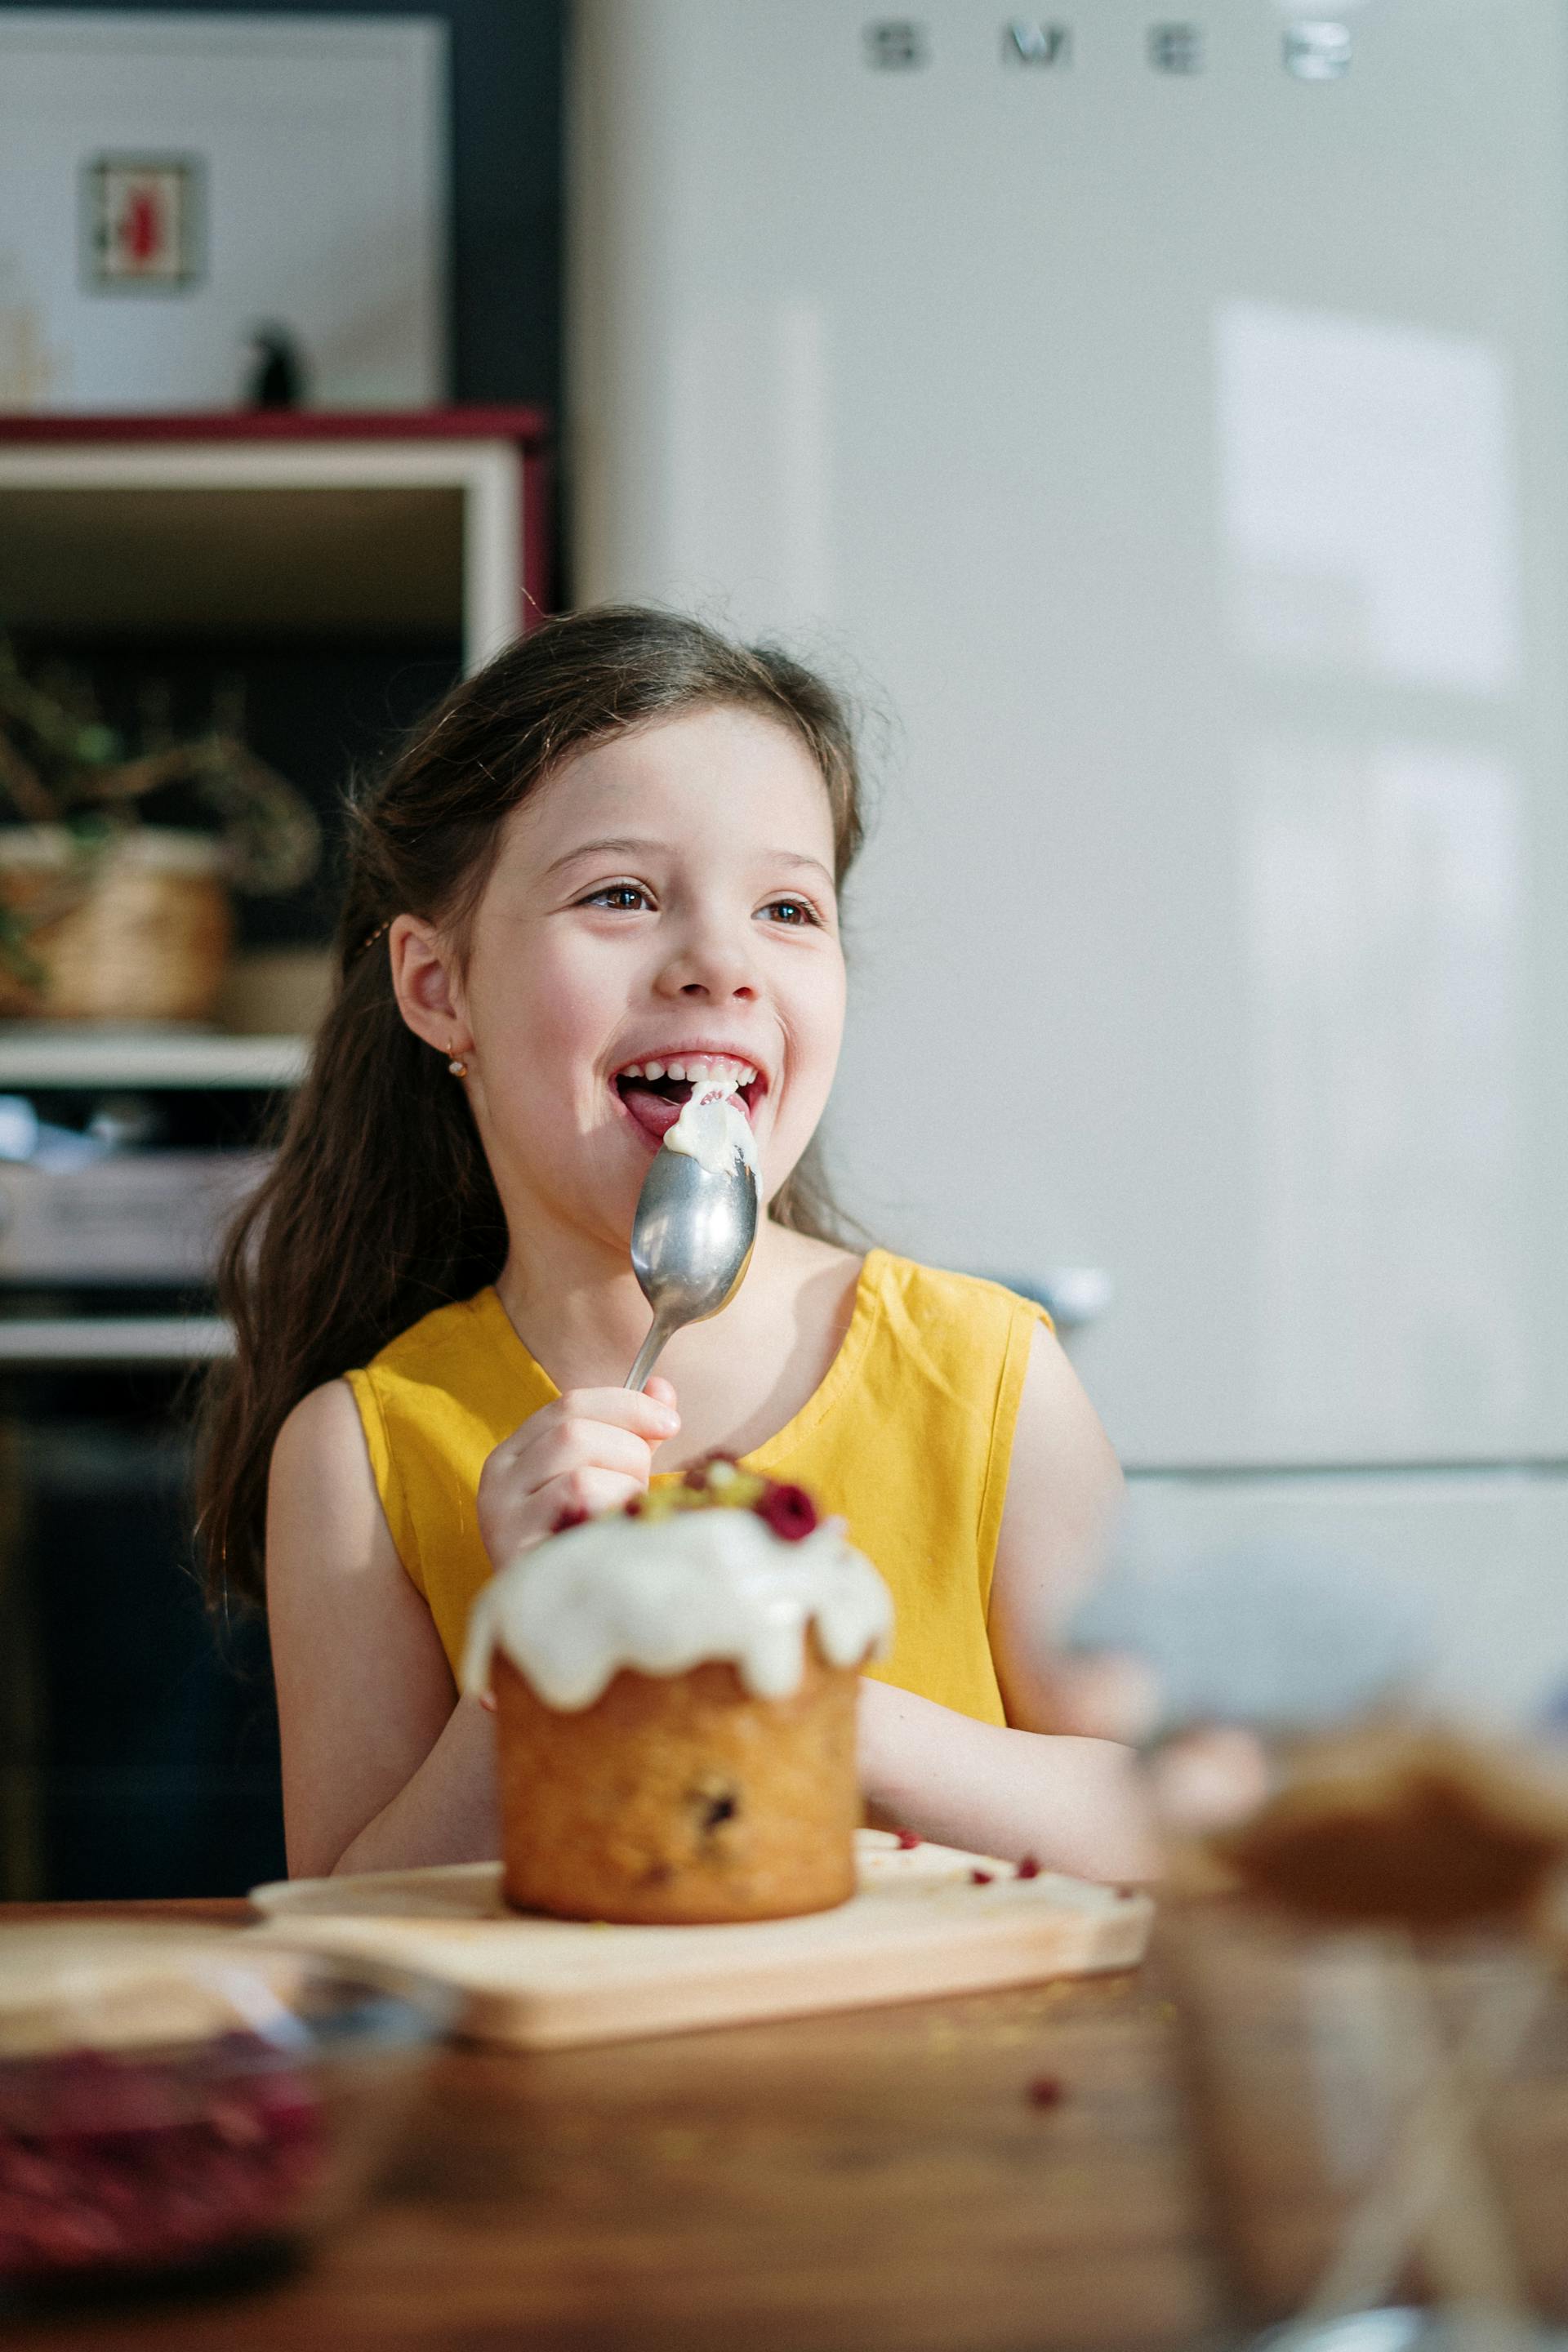 A little girl eating cake | Source: Pexels